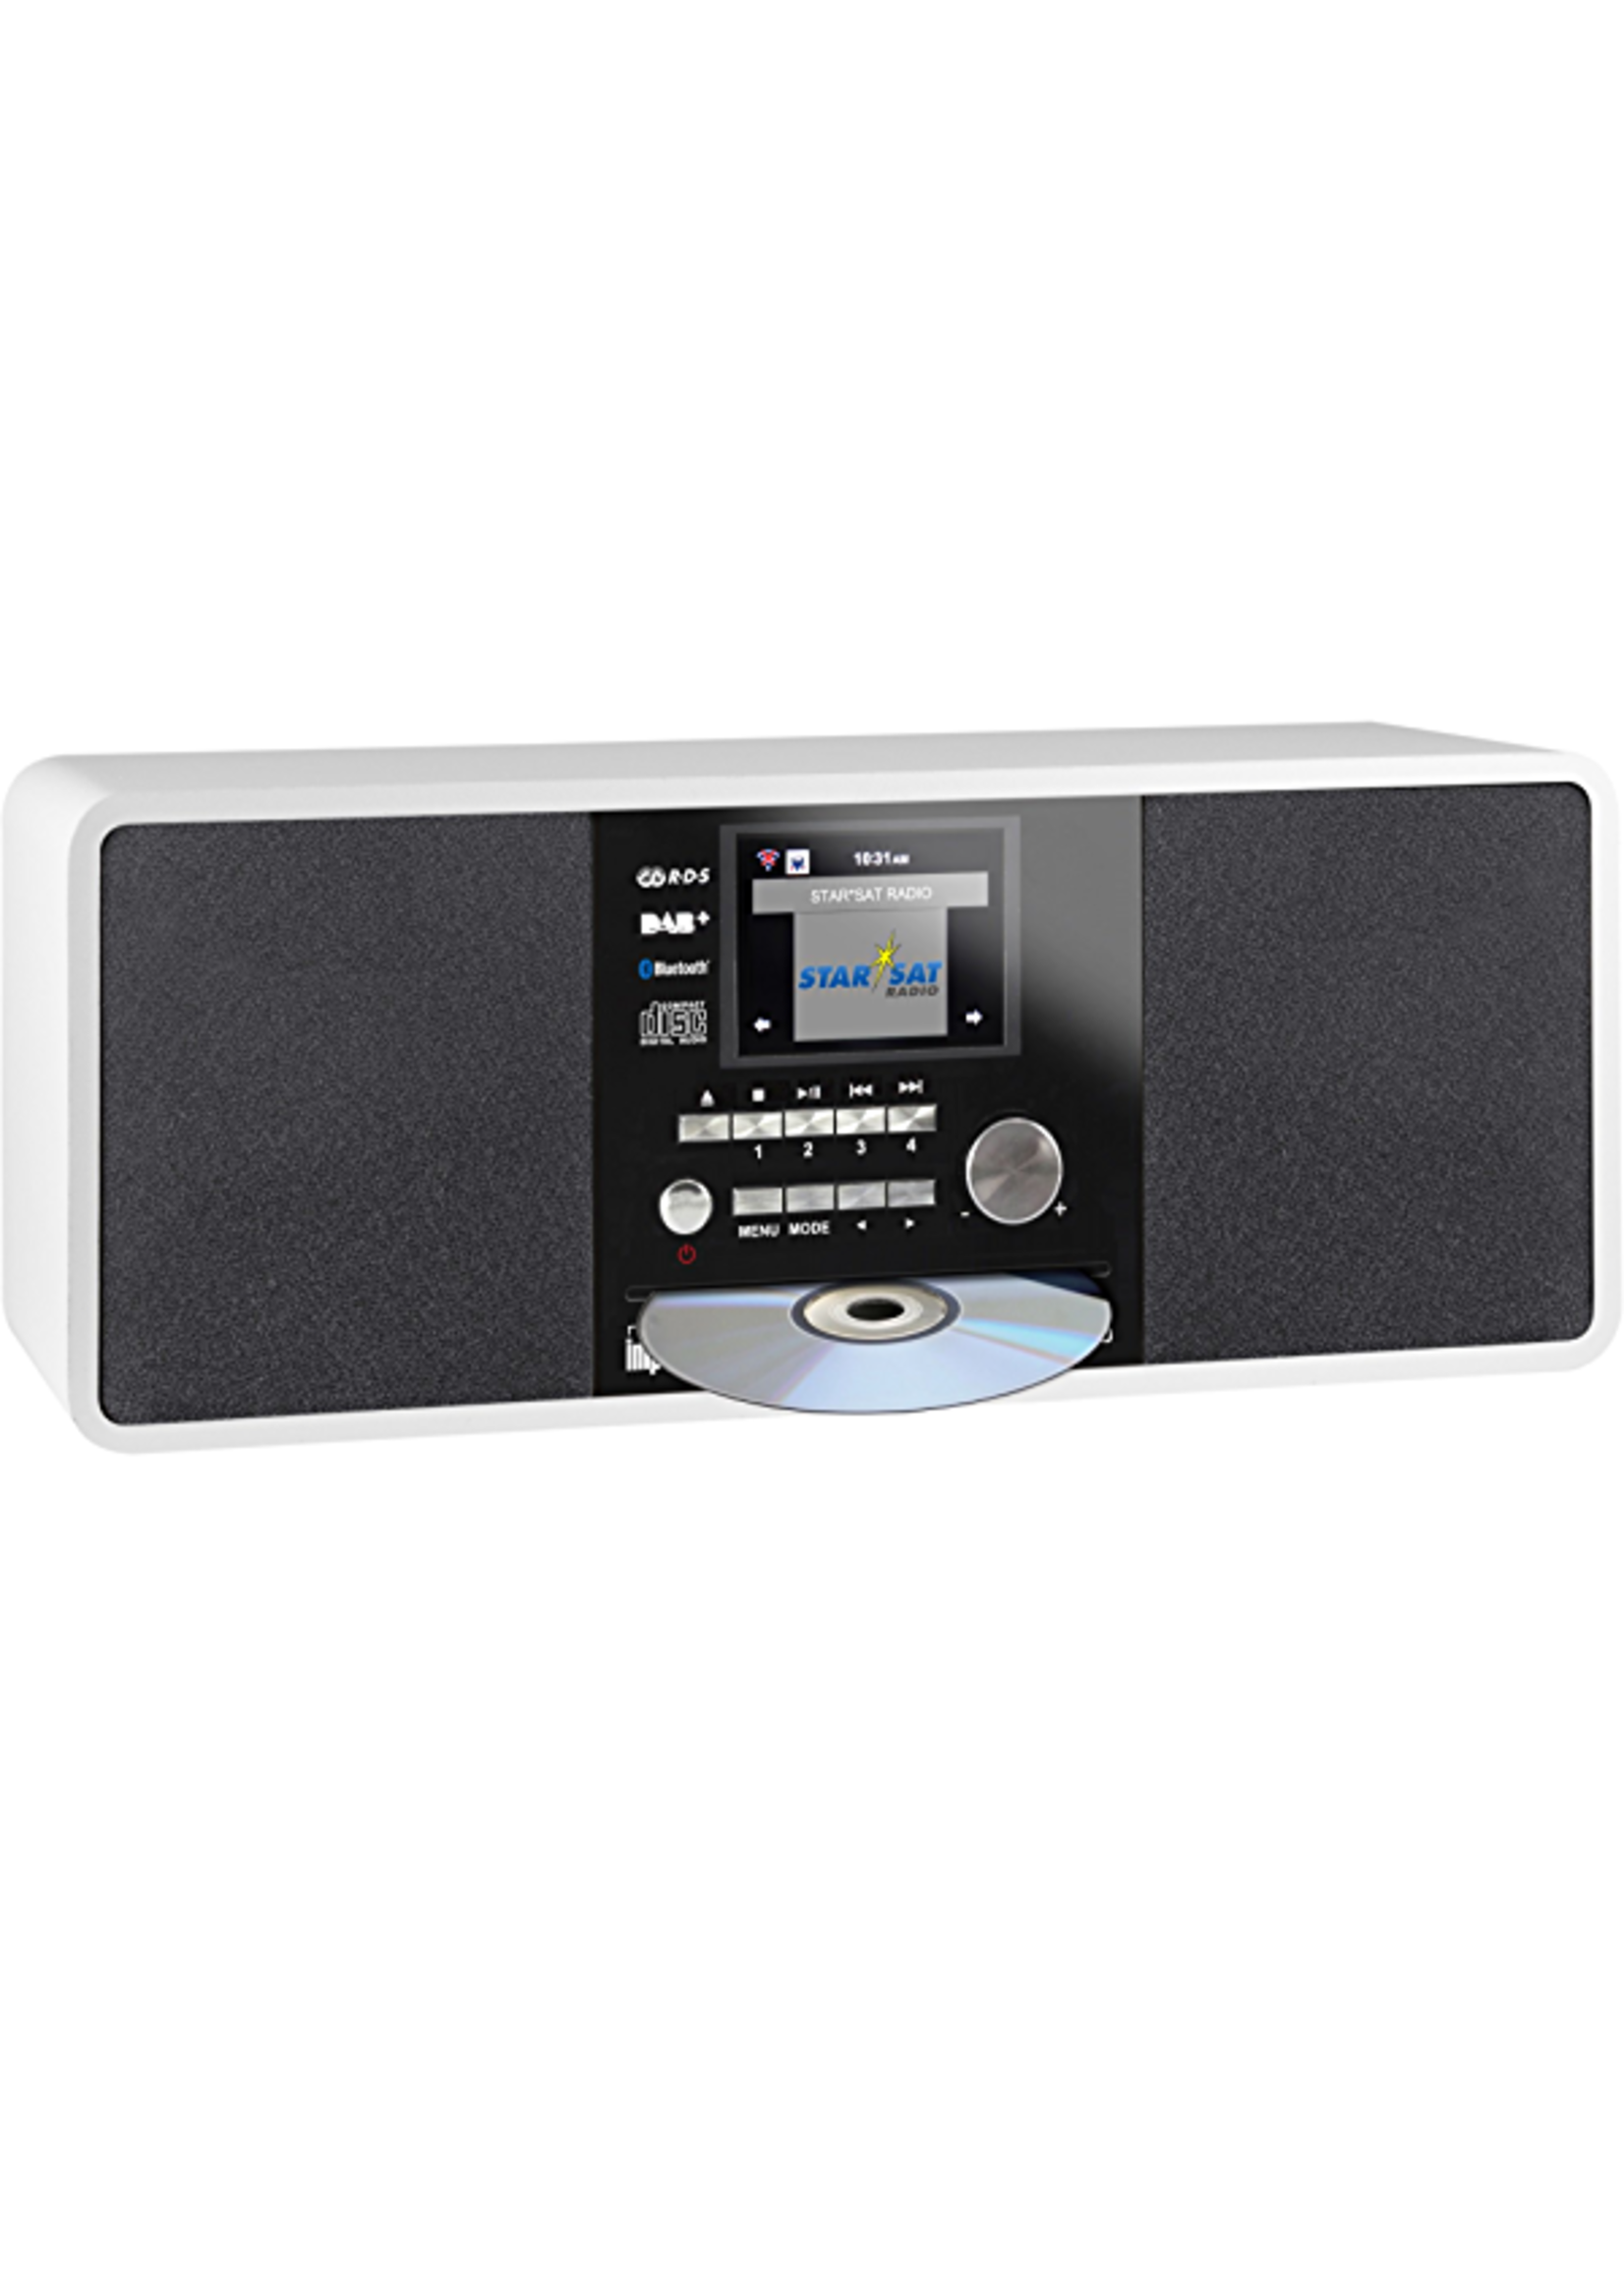 Imperial Imperial Dabman i200 CD Radio Wit